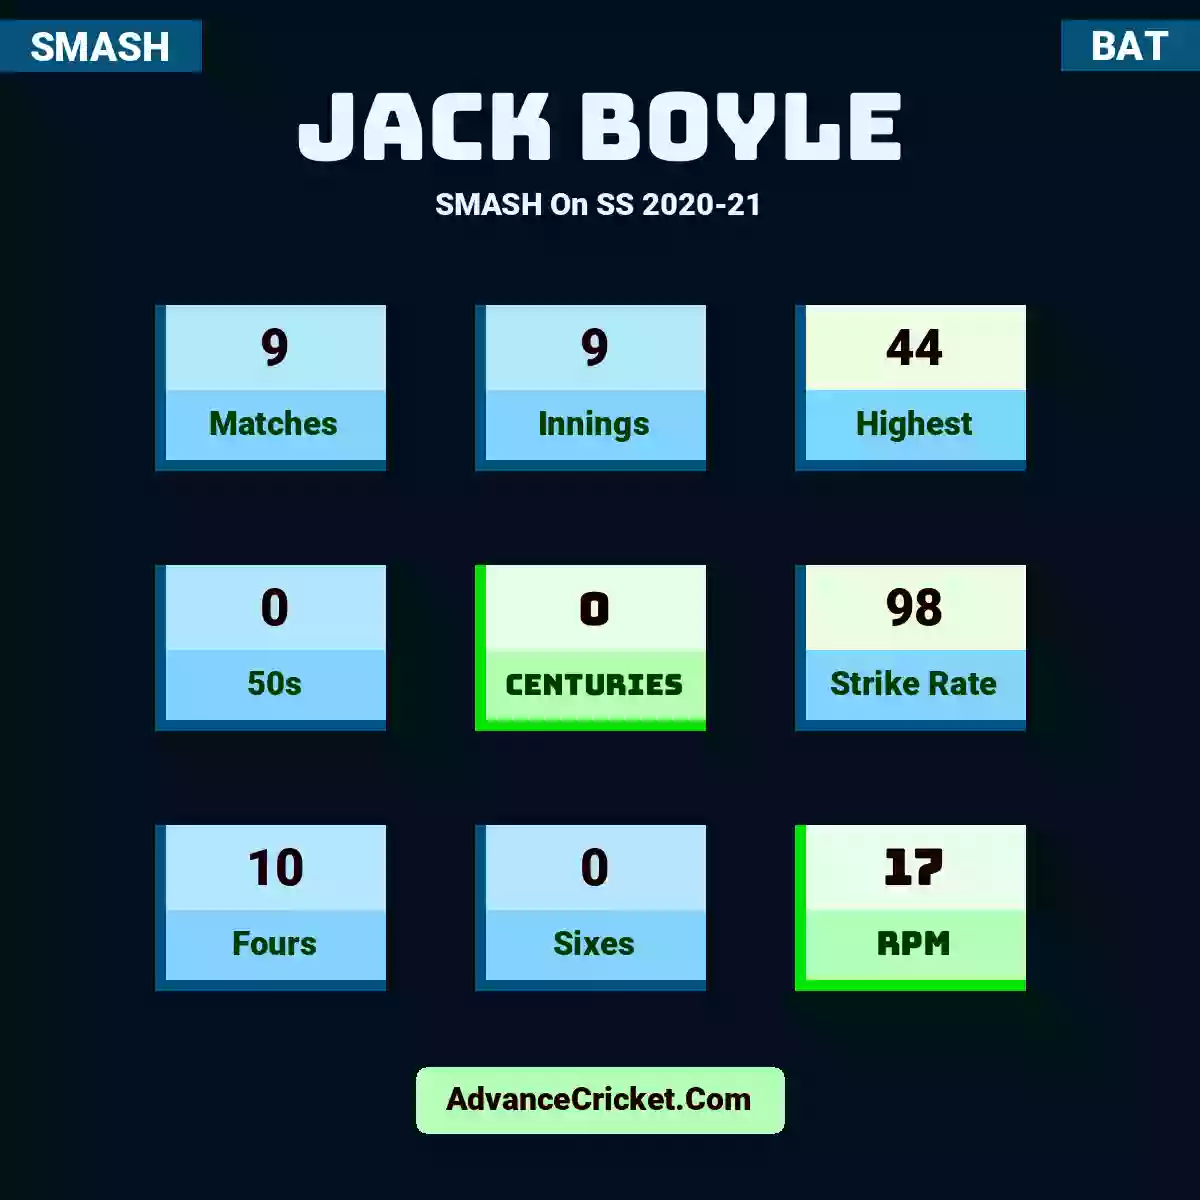 Jack Boyle SMASH  On SS 2020-21, Jack Boyle played 9 matches, scored 44 runs as highest, 0 half-centuries, and 0 centuries, with a strike rate of 98. J.Boyle hit 10 fours and 0 sixes, with an RPM of 17.